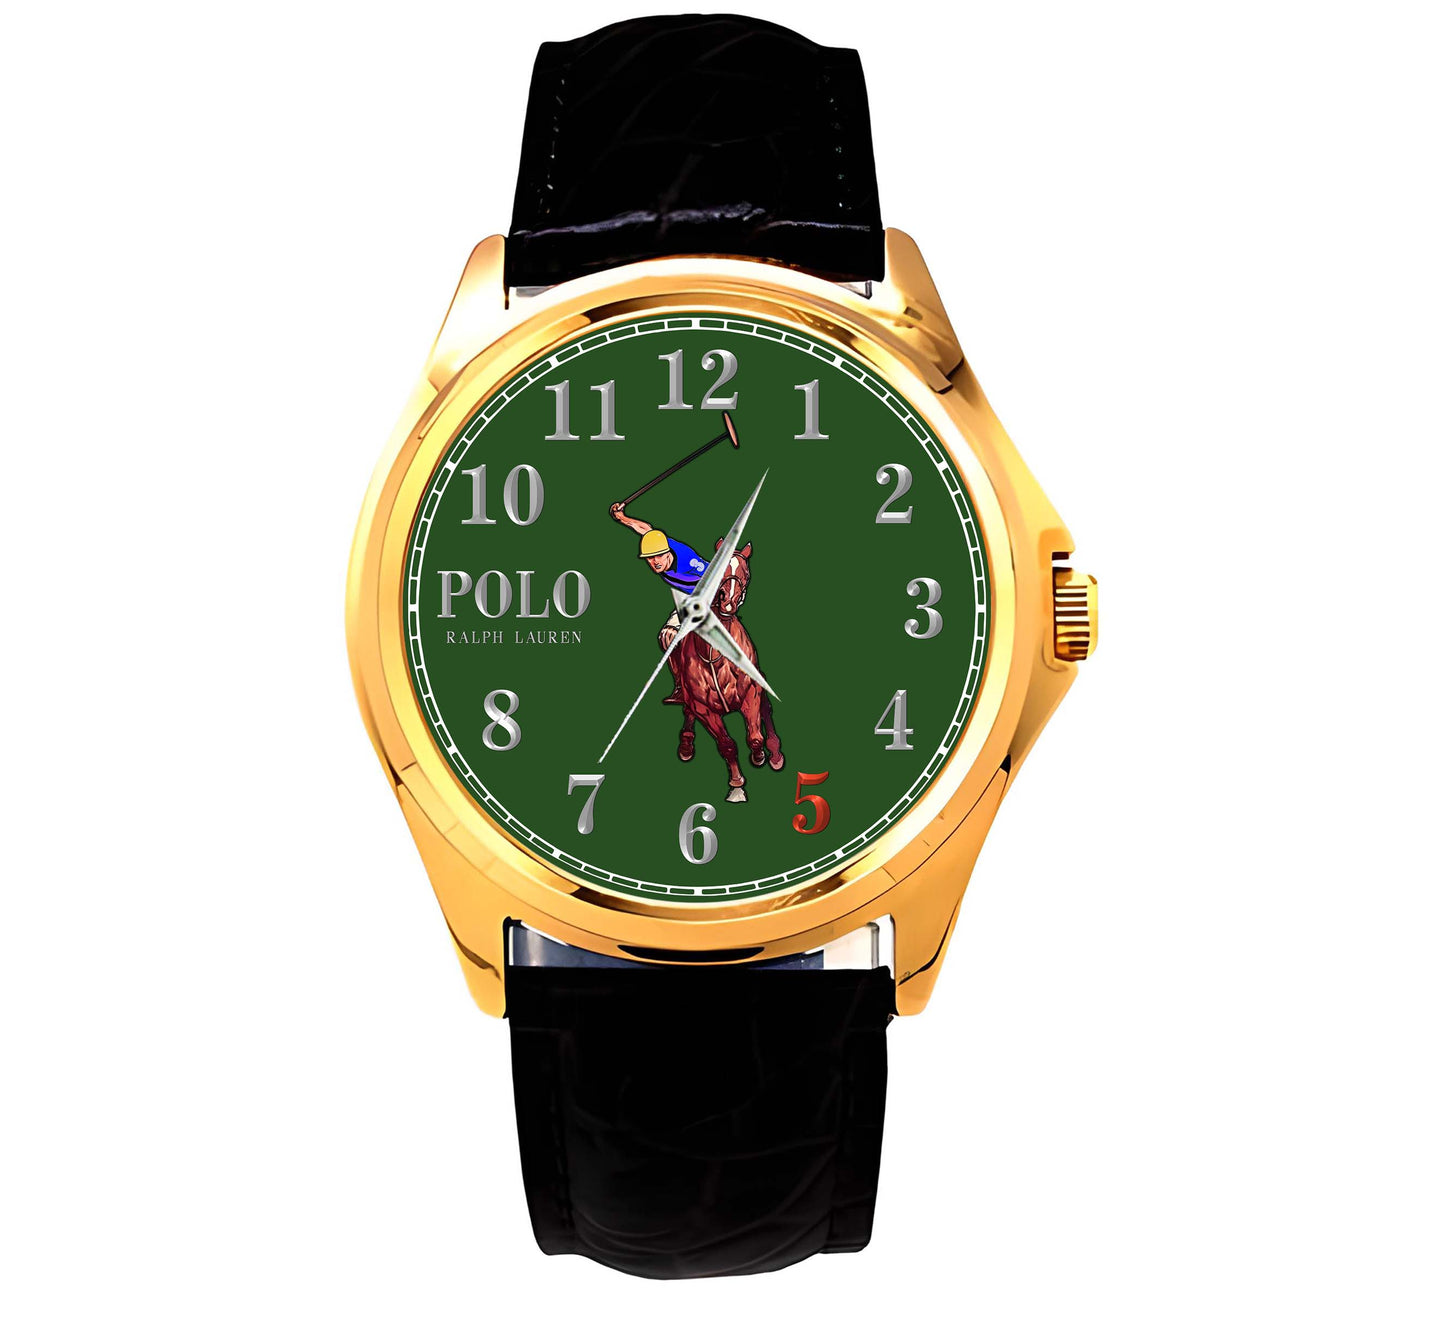 POLO Military By Ralph Lauren Sport Metal Watch NM 14.1